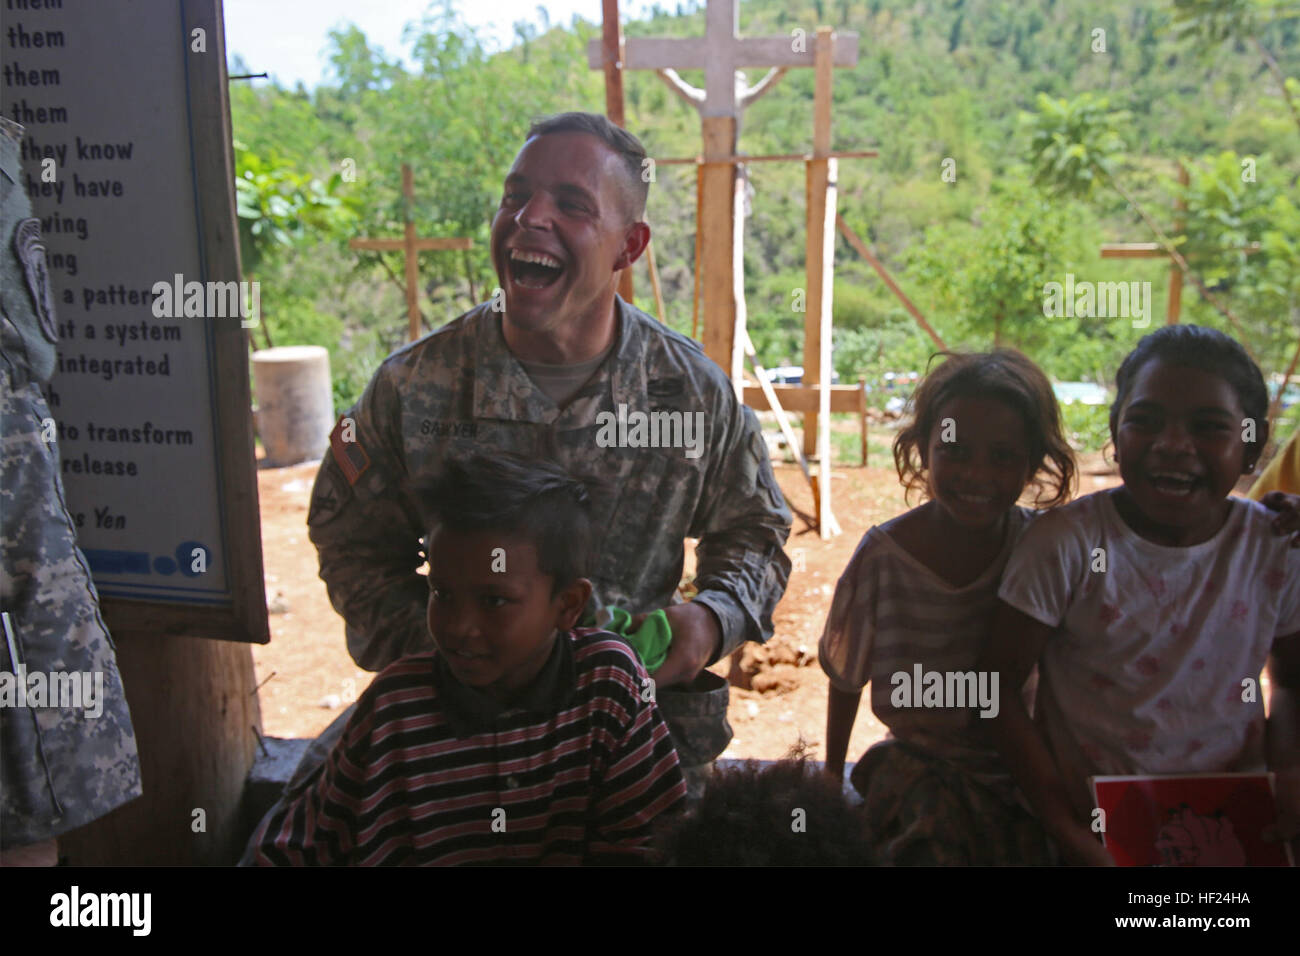 U.S. Army 1st Lt. Dane Sawyer, civil affairs officer with 351st Civil Affairs Command, 405th Civil Affairs Battalion, talks to children of the Aeta tribe during 'Bayanihan' as part of exercise Balikatan 2014, near Fort Ramon Magsaysay, Palayan City, Philippines, May 8. Bayanihan, meaning 'communal spirit' in Filipino, is comprised of food and festivities provided by the Nueva Ecija Cardinals Lion's Club to the local Aeta families with the support of Philippine and U.S. Army soldiers. The exercise is an annual bilateral training exercise between the Philippines and U.S. designed to foster coope Stock Photo